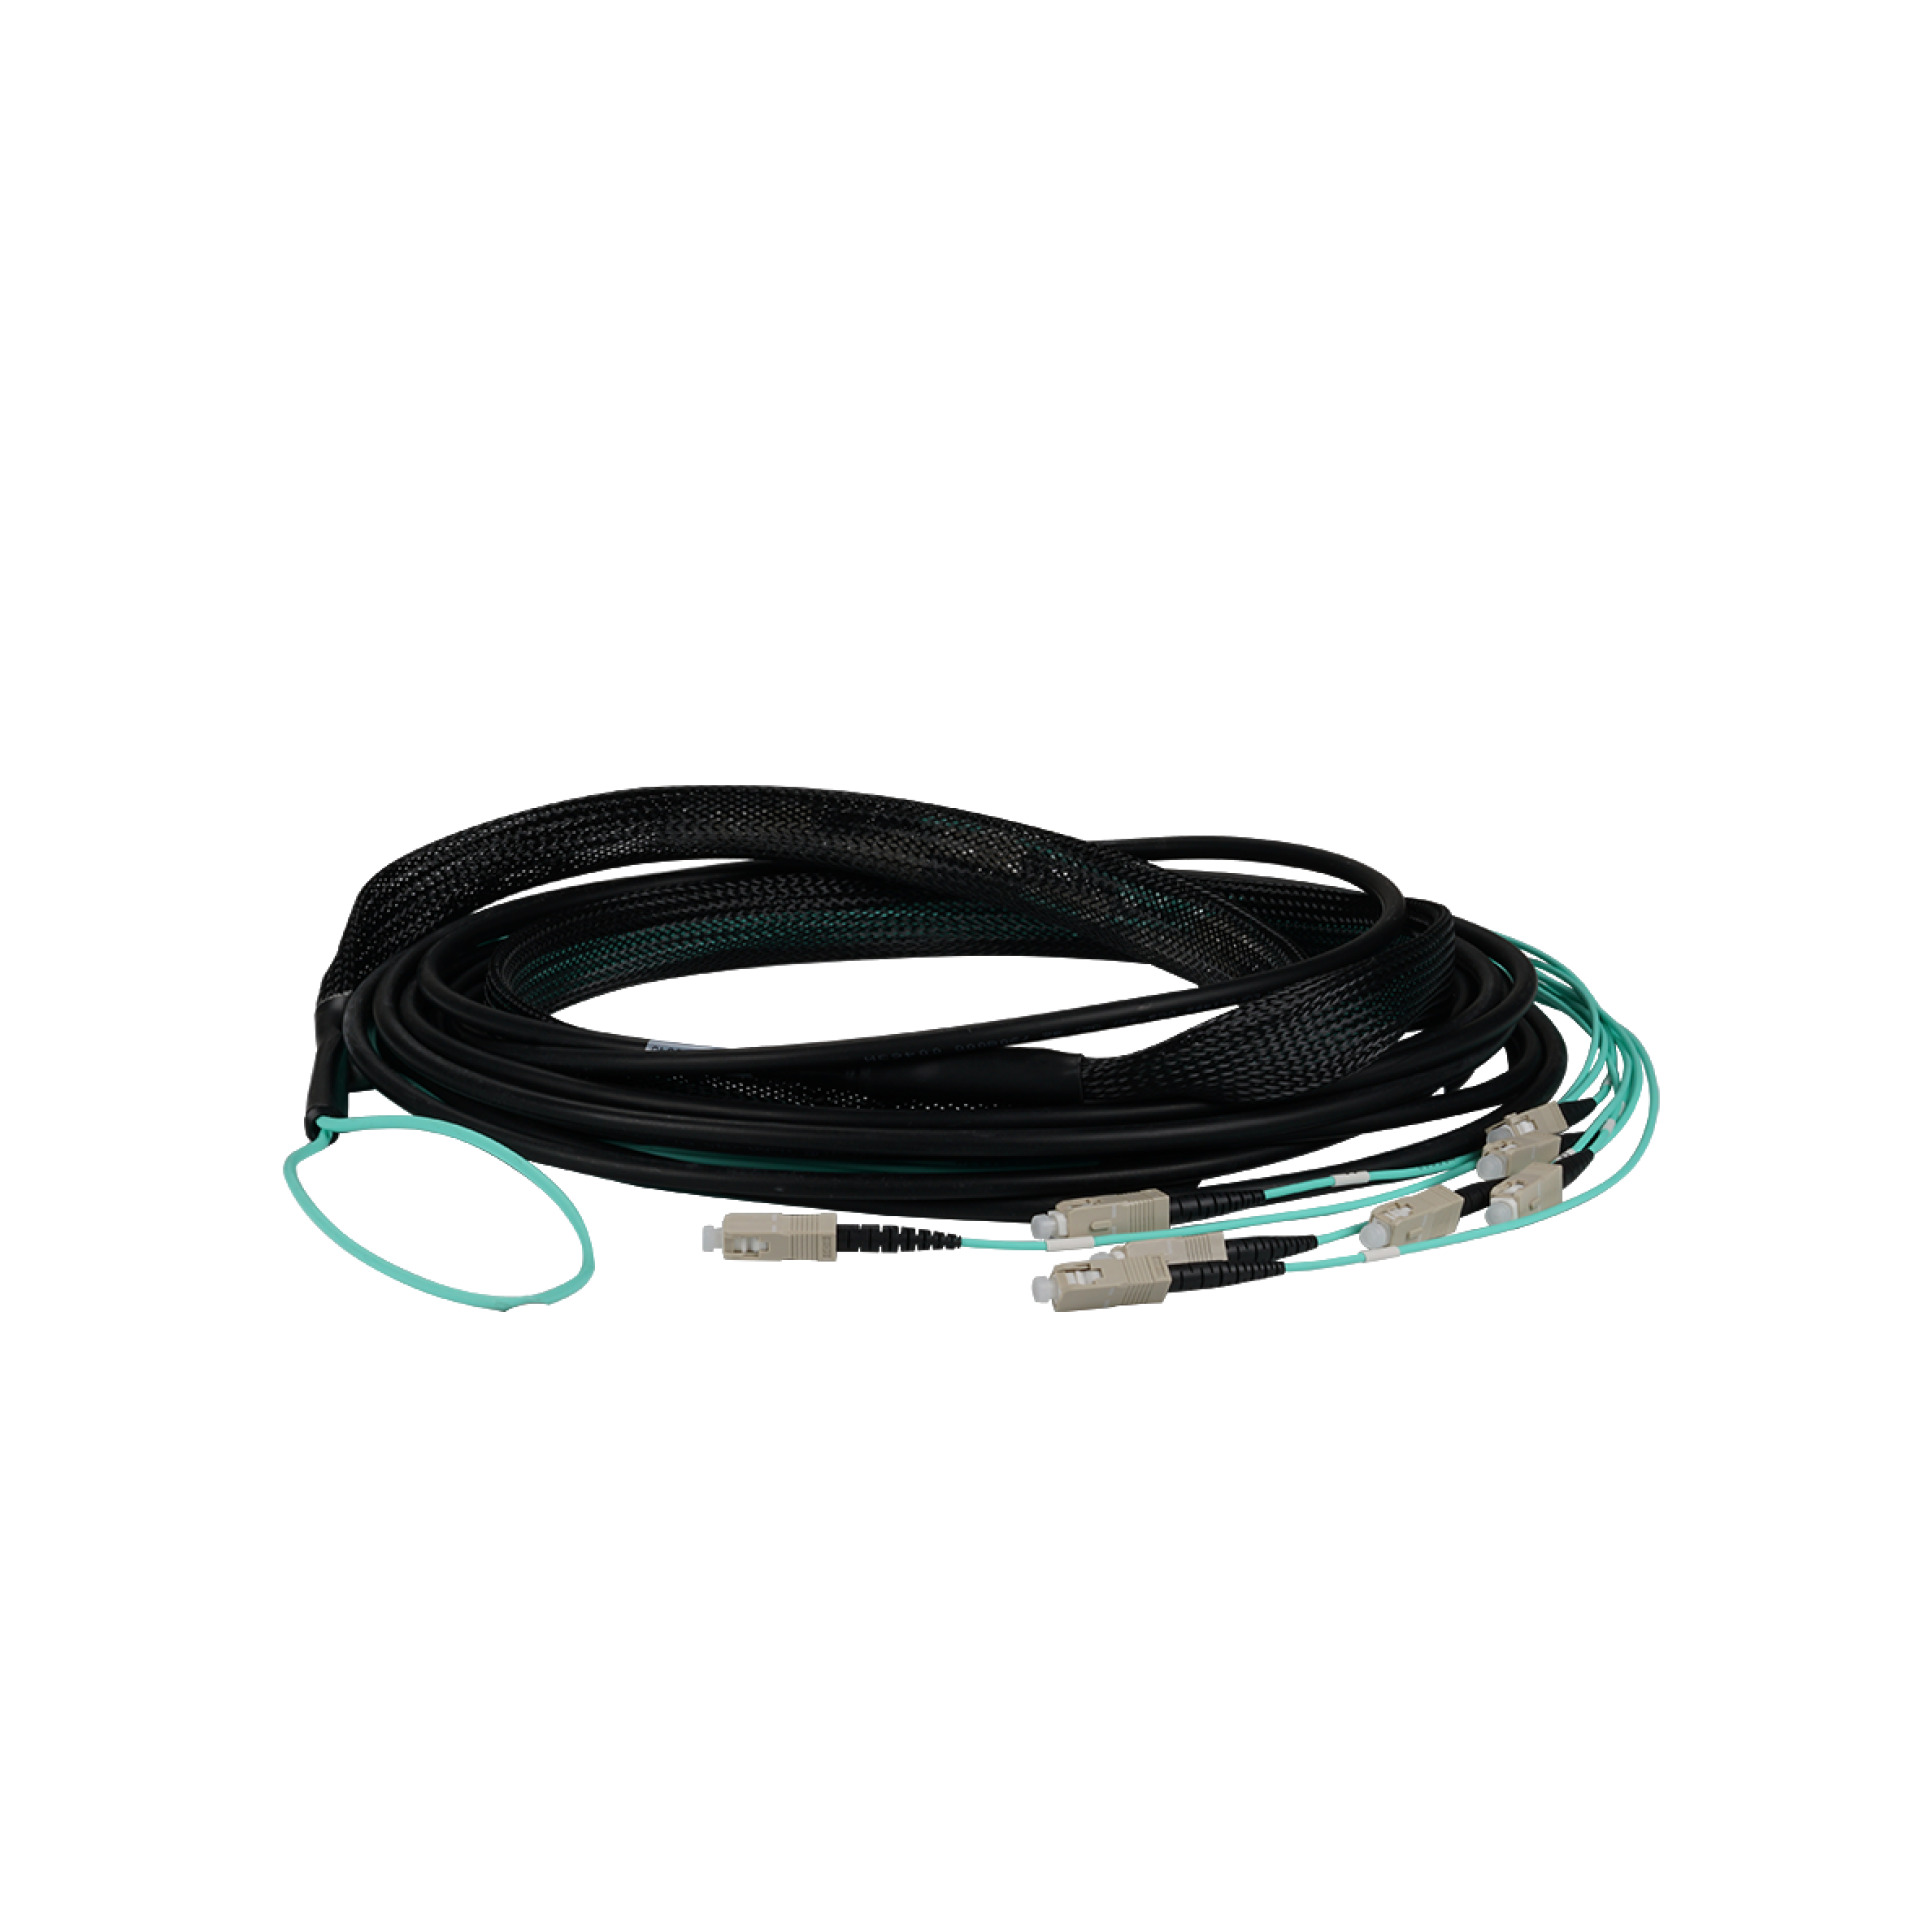 Trunk cable U-DQ(ZN)BH 4G 50/125, SC/SC OM3 30m